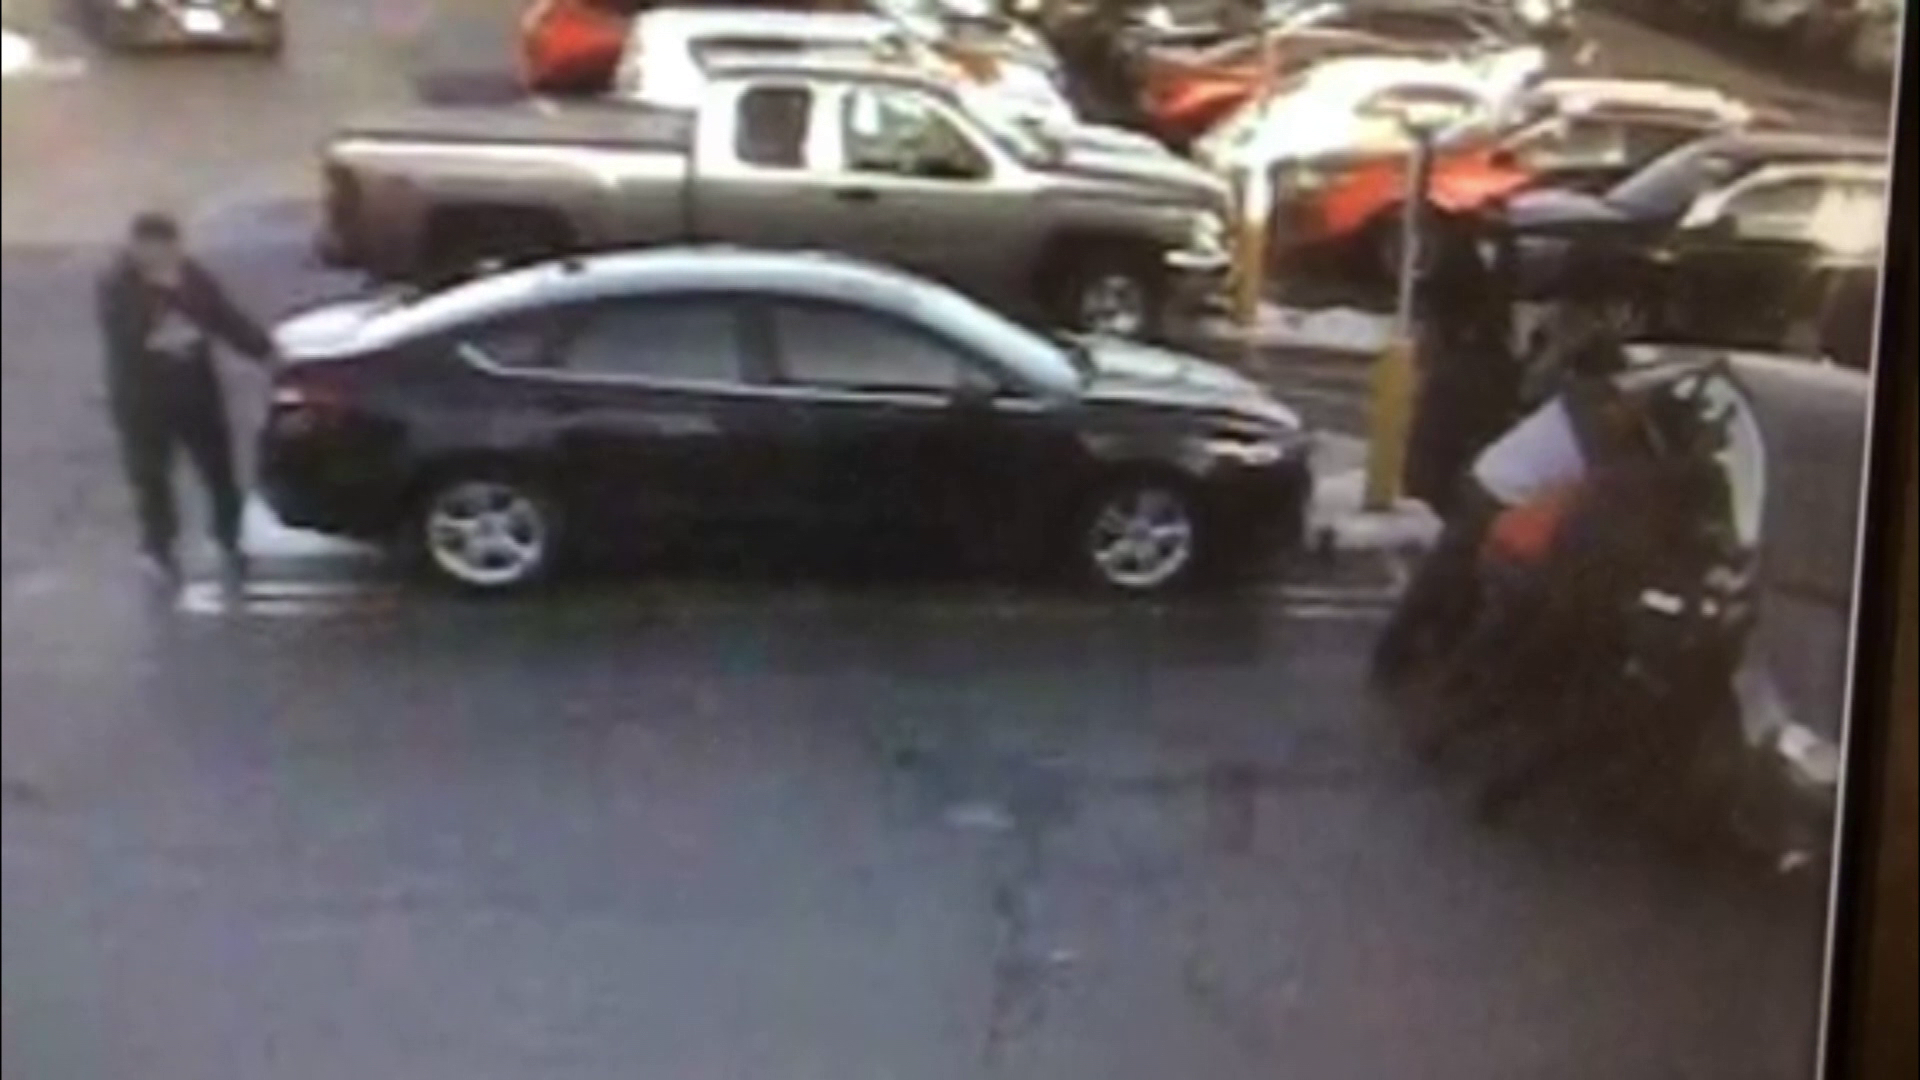 Surveillance video shows a group lifting a car from a woman in Quincy